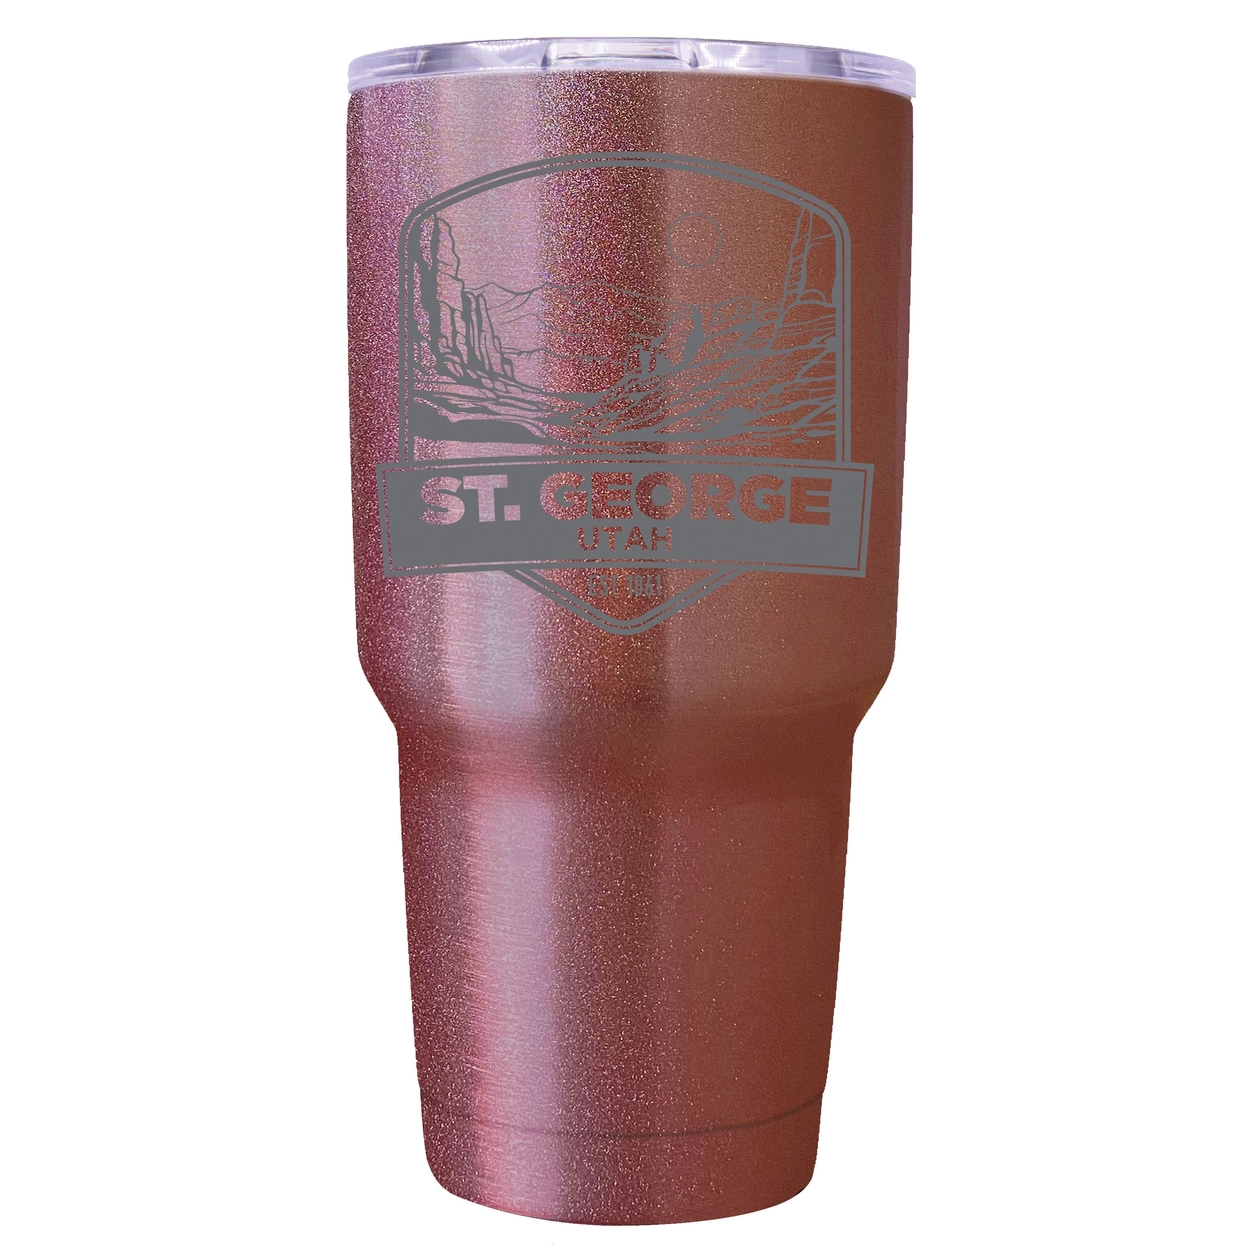 St. George Utah Souvenir 24 Oz Engraved Insulated Stainless Steel Tumbler - Rose Gold,,Single Unit